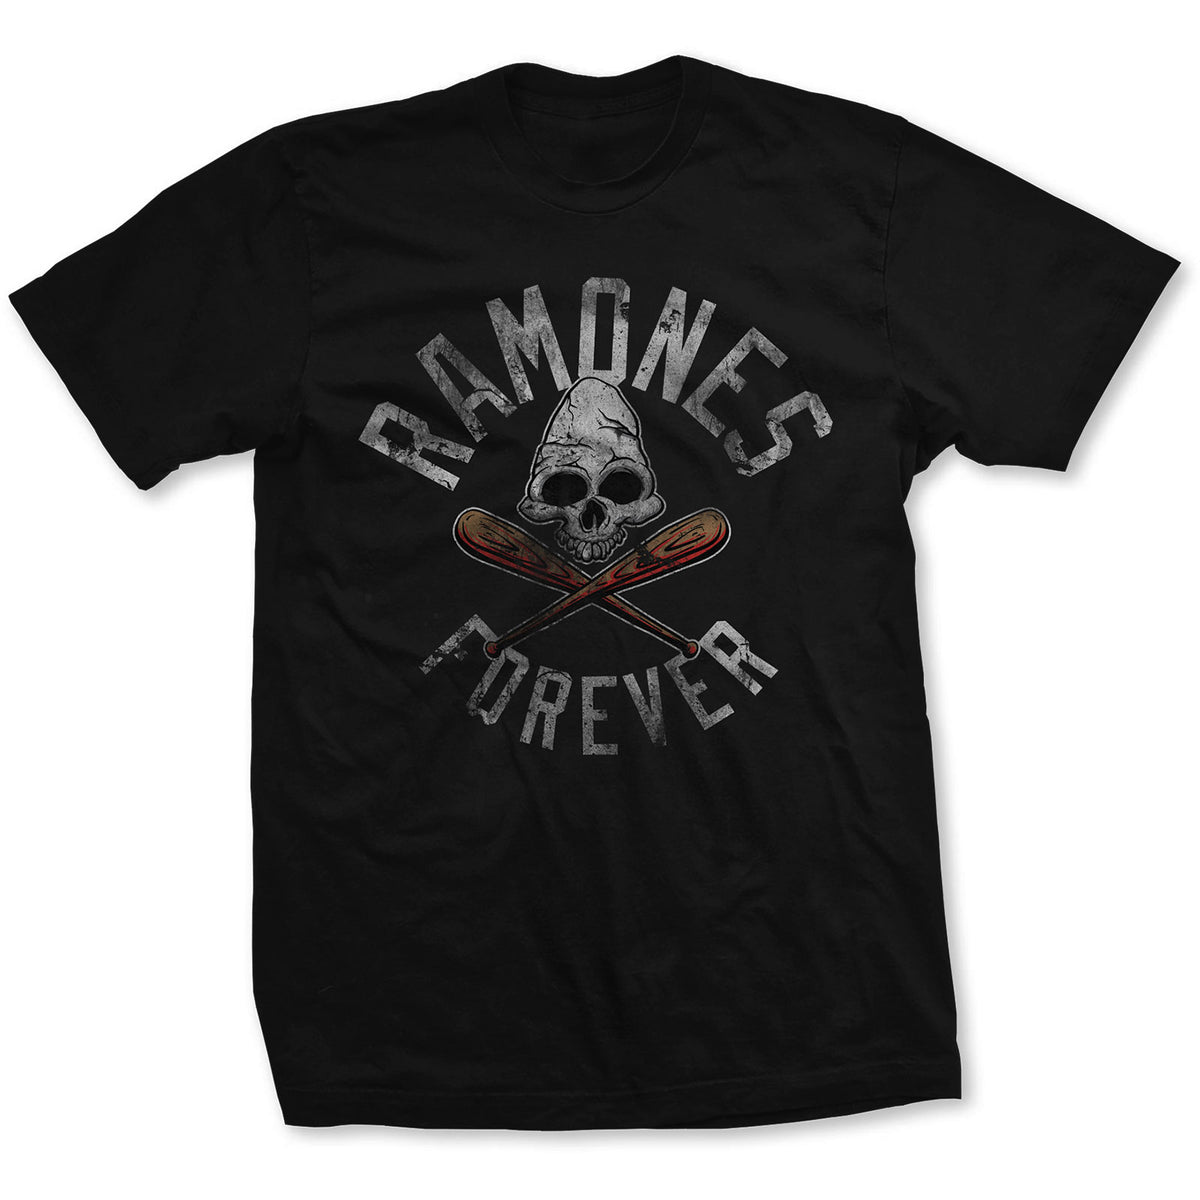 T-shirt adulte The Ramones - Forever - Conception sous licence officielle